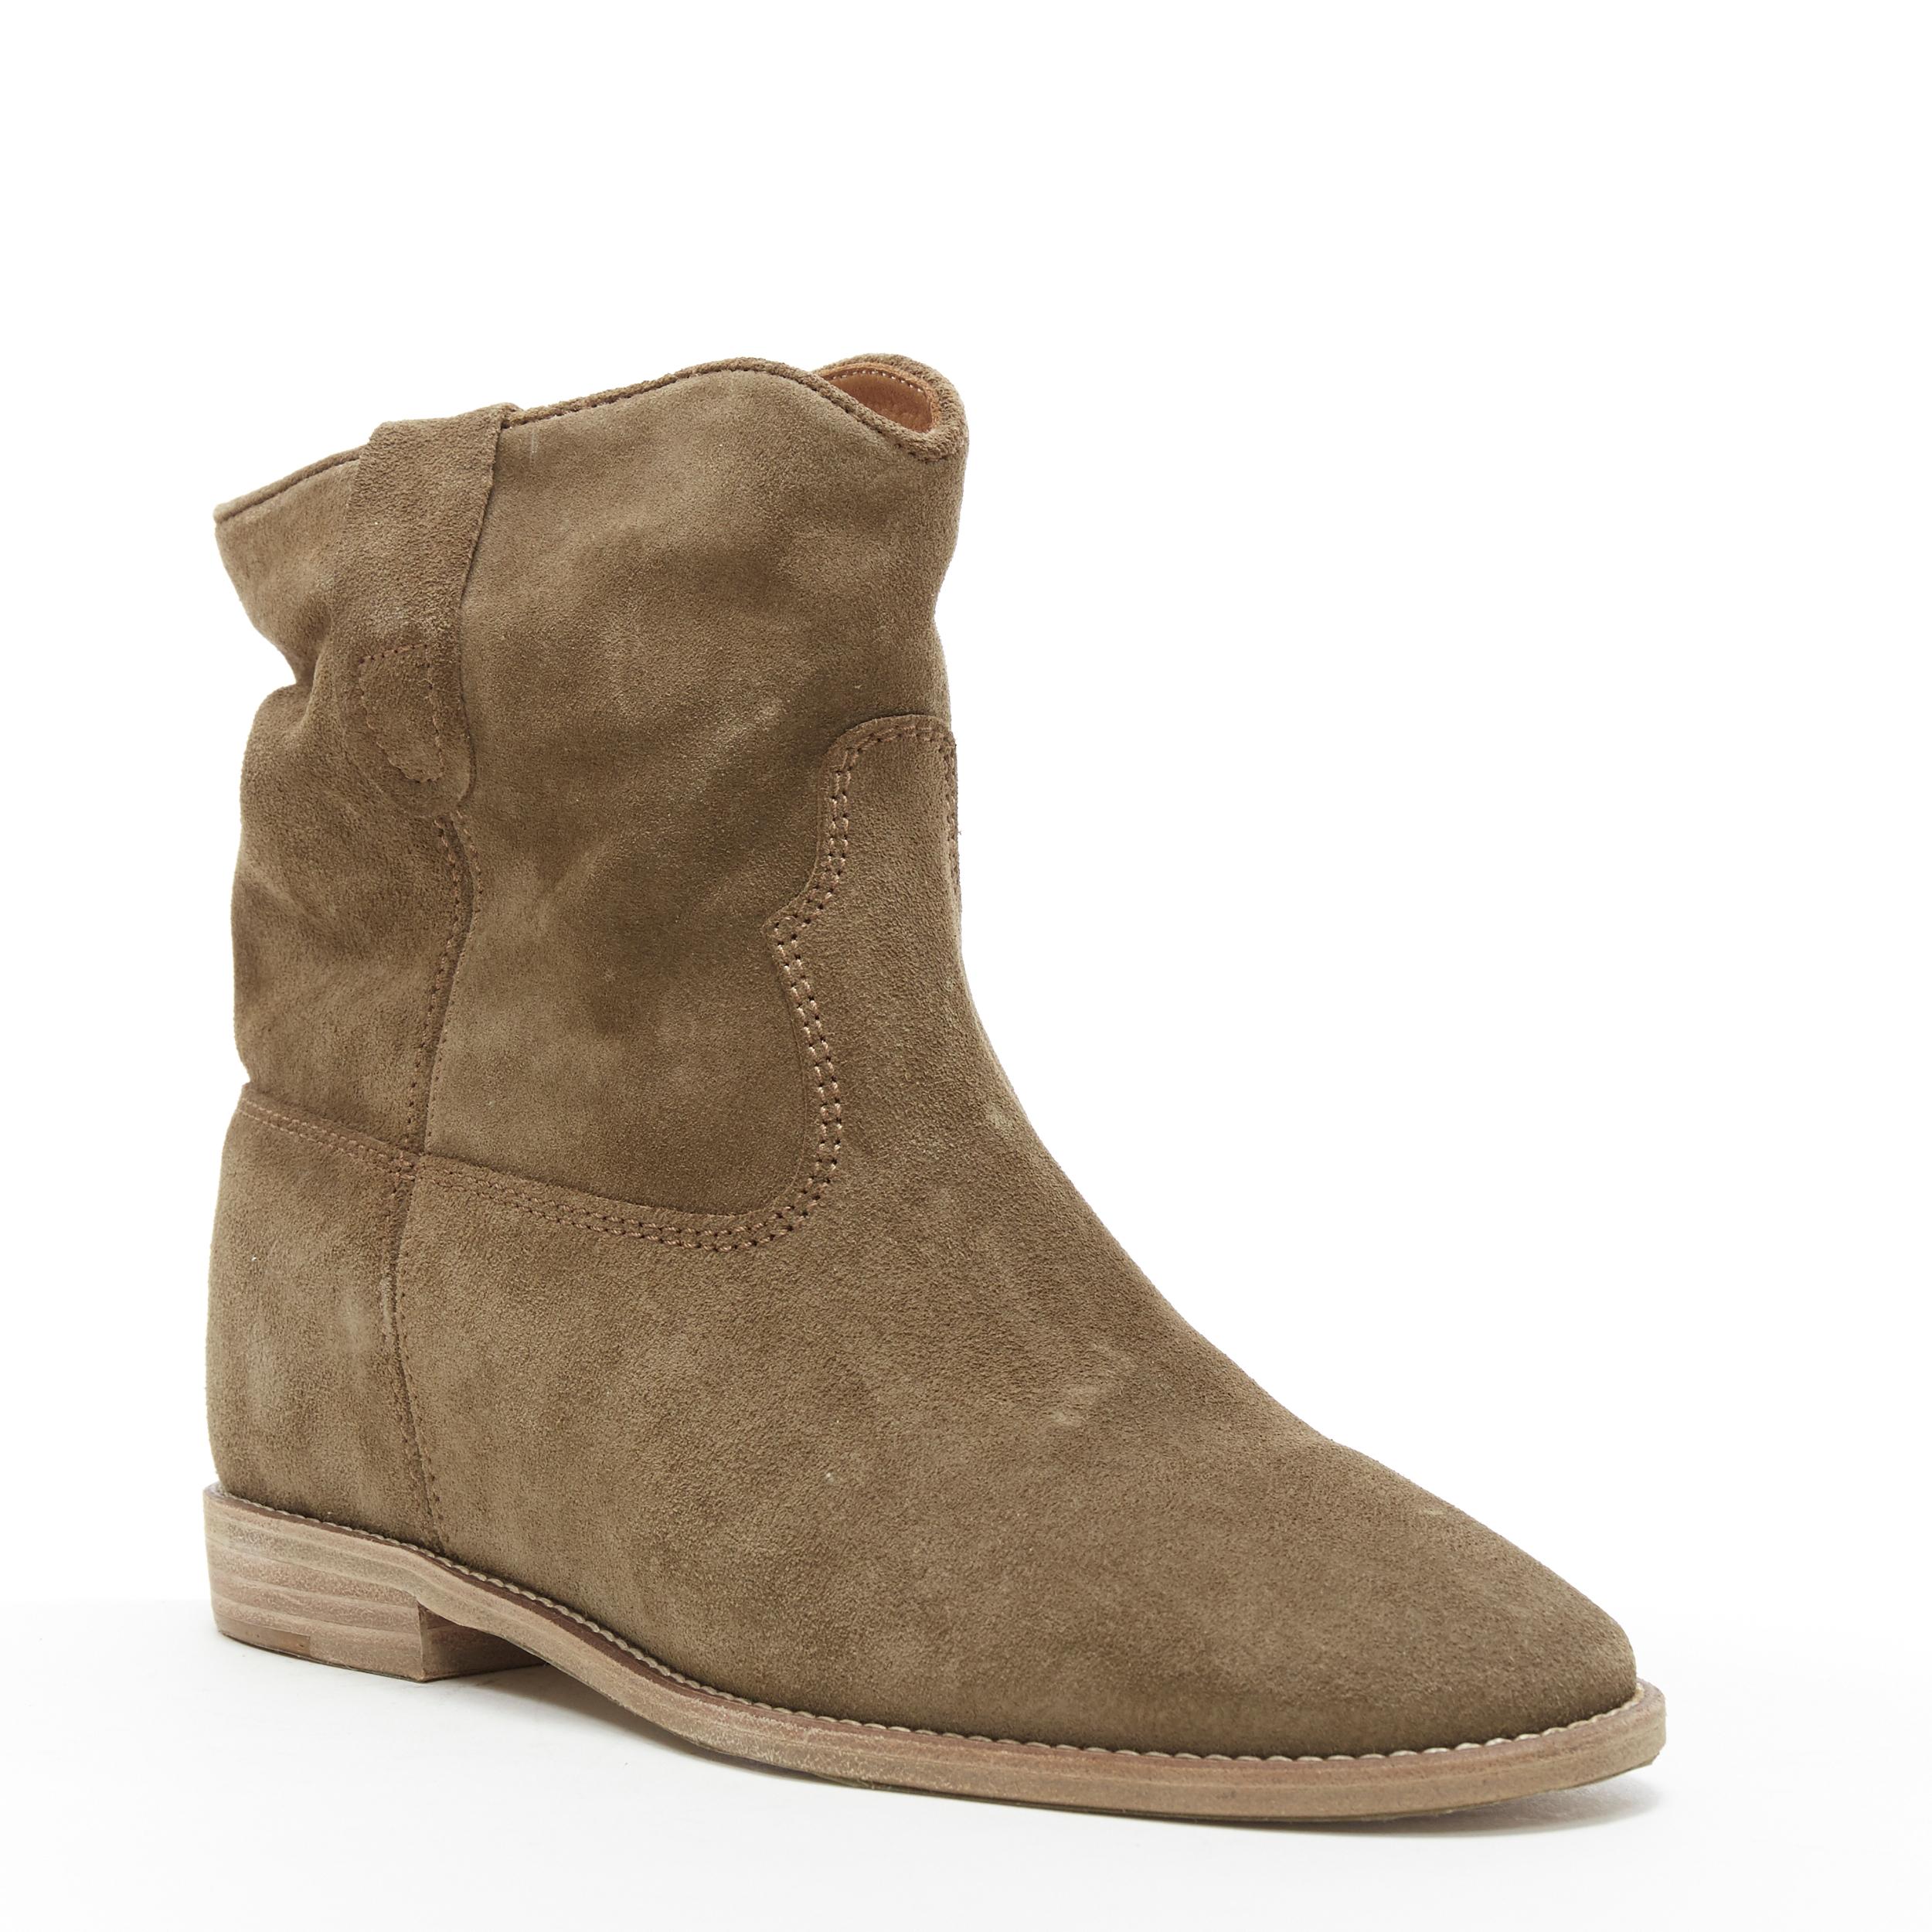 new ISABEL MARANT Crisi Taupe Olive suede concealed wedge western boots EU40
Brand: Isabel Marant
Designer: Isabel Marant
Model Name / Style: Crisi
Material: Suede
Color: Other; Taupe
Pattern: Solid
Closure: Pull on
Extra Detail: Part of Isabel